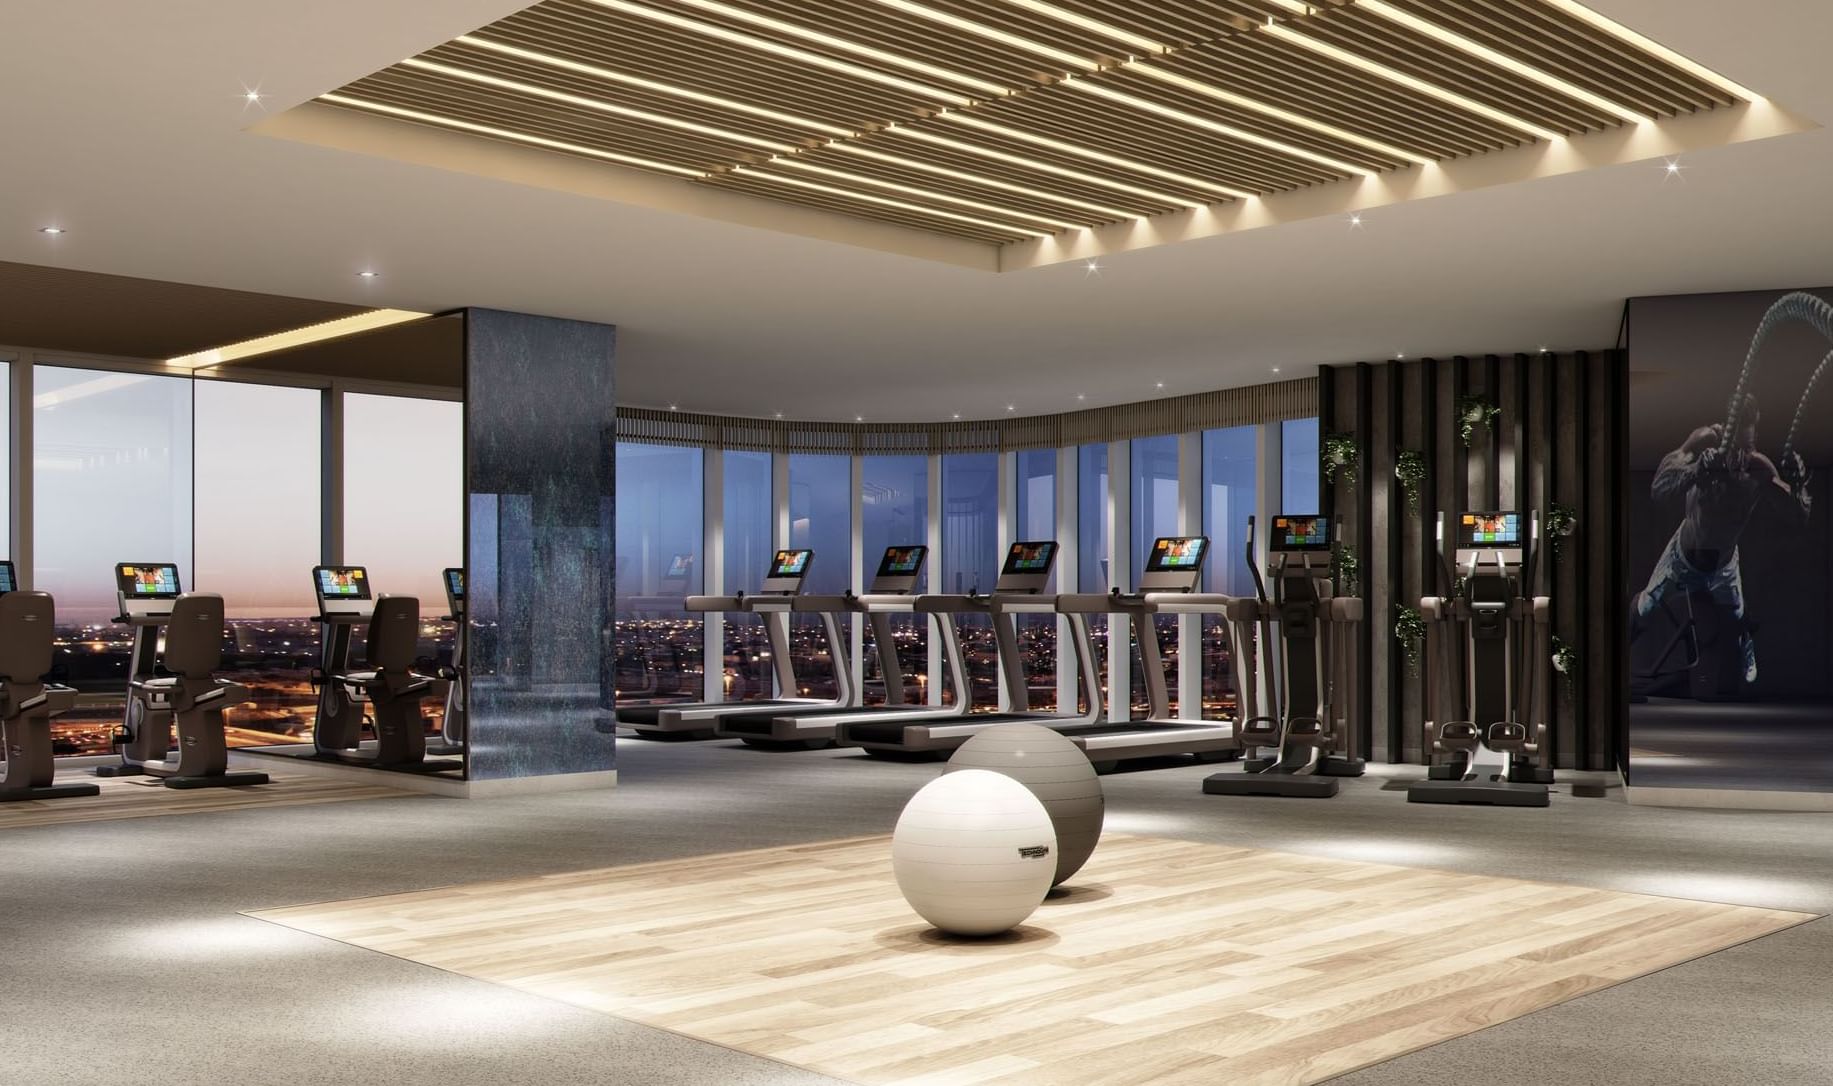 The Fully equipped gymnasium at Paramount Hotel Midtown